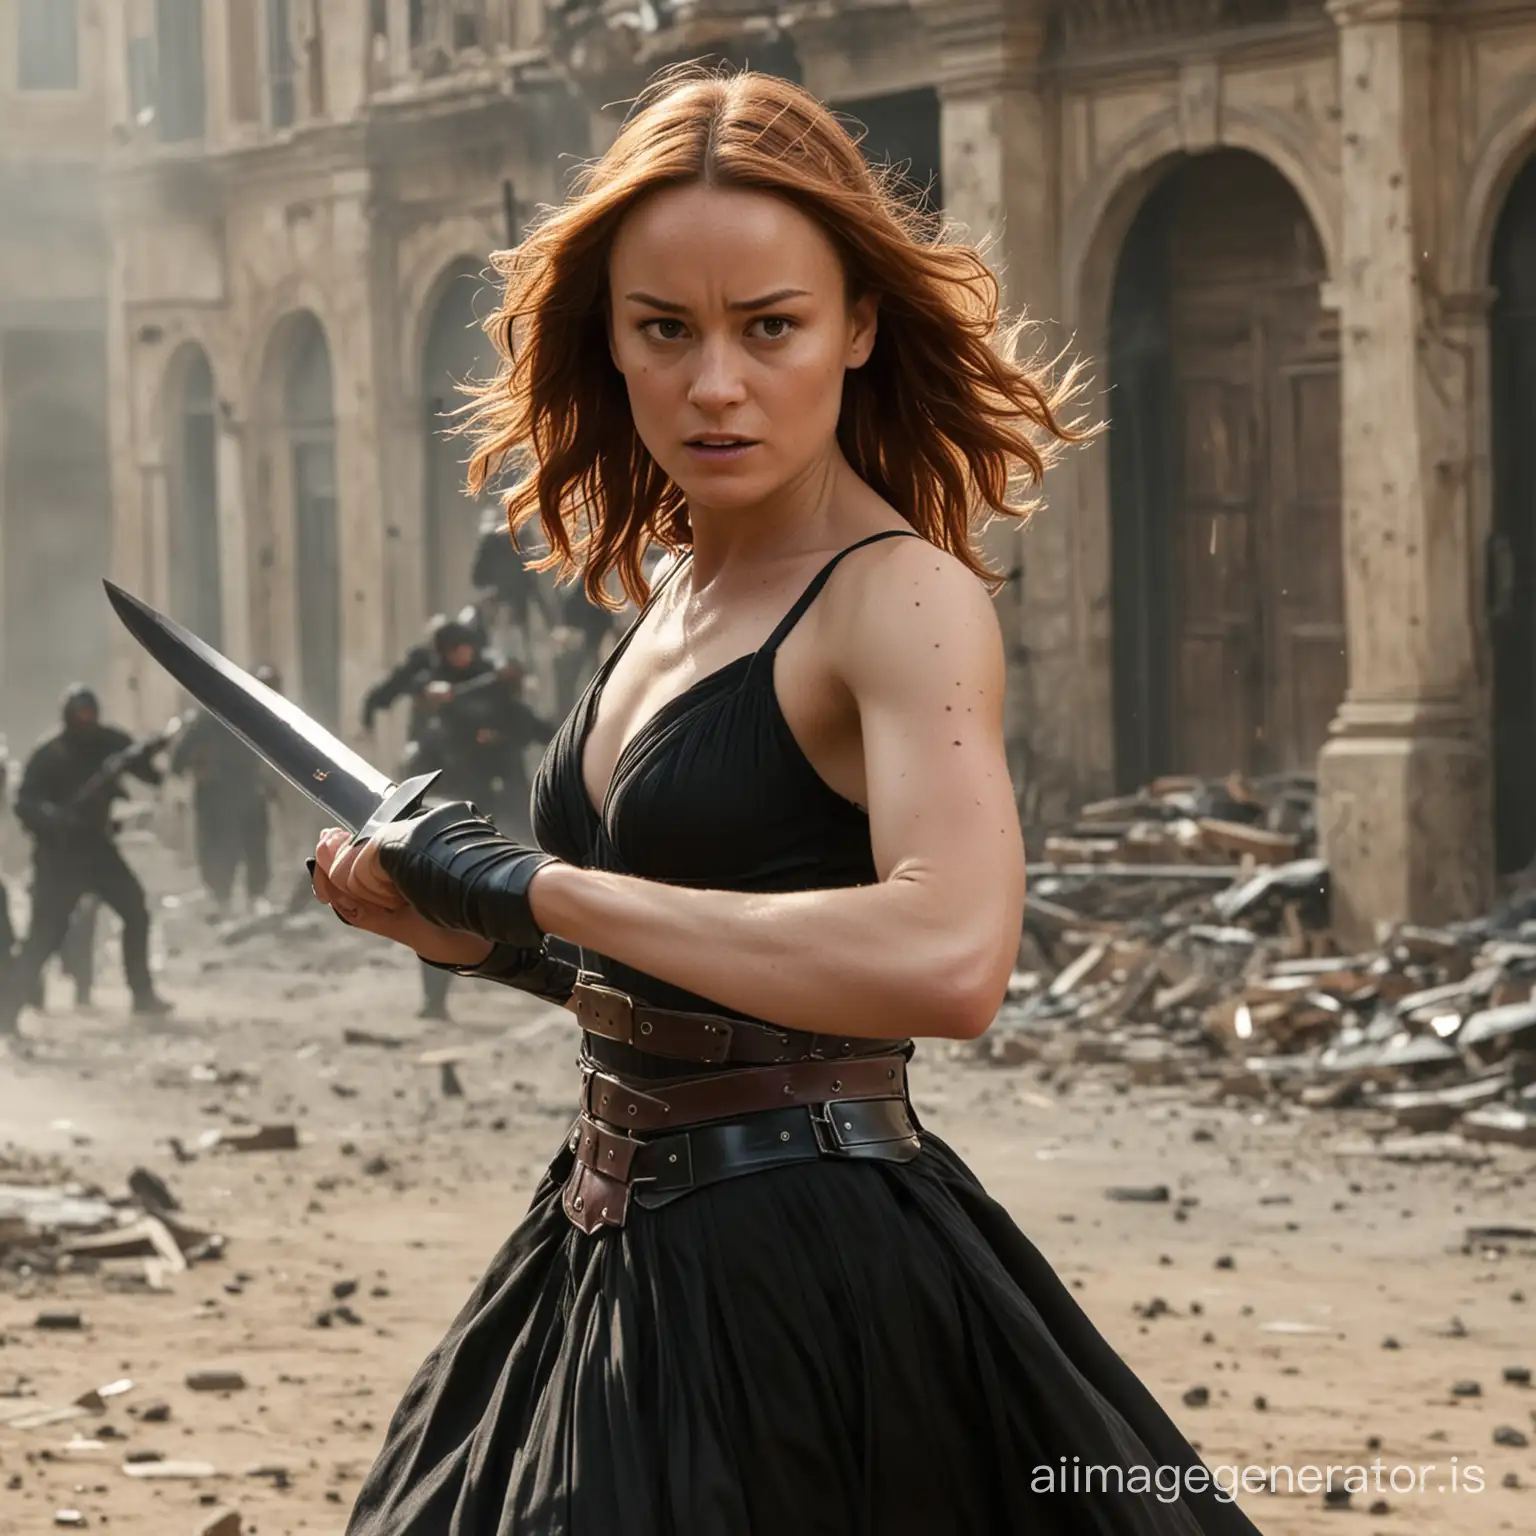 Brie Larson with dark red hair in a black ball gown fighting with throwing knives against insurgents in a European city warzone